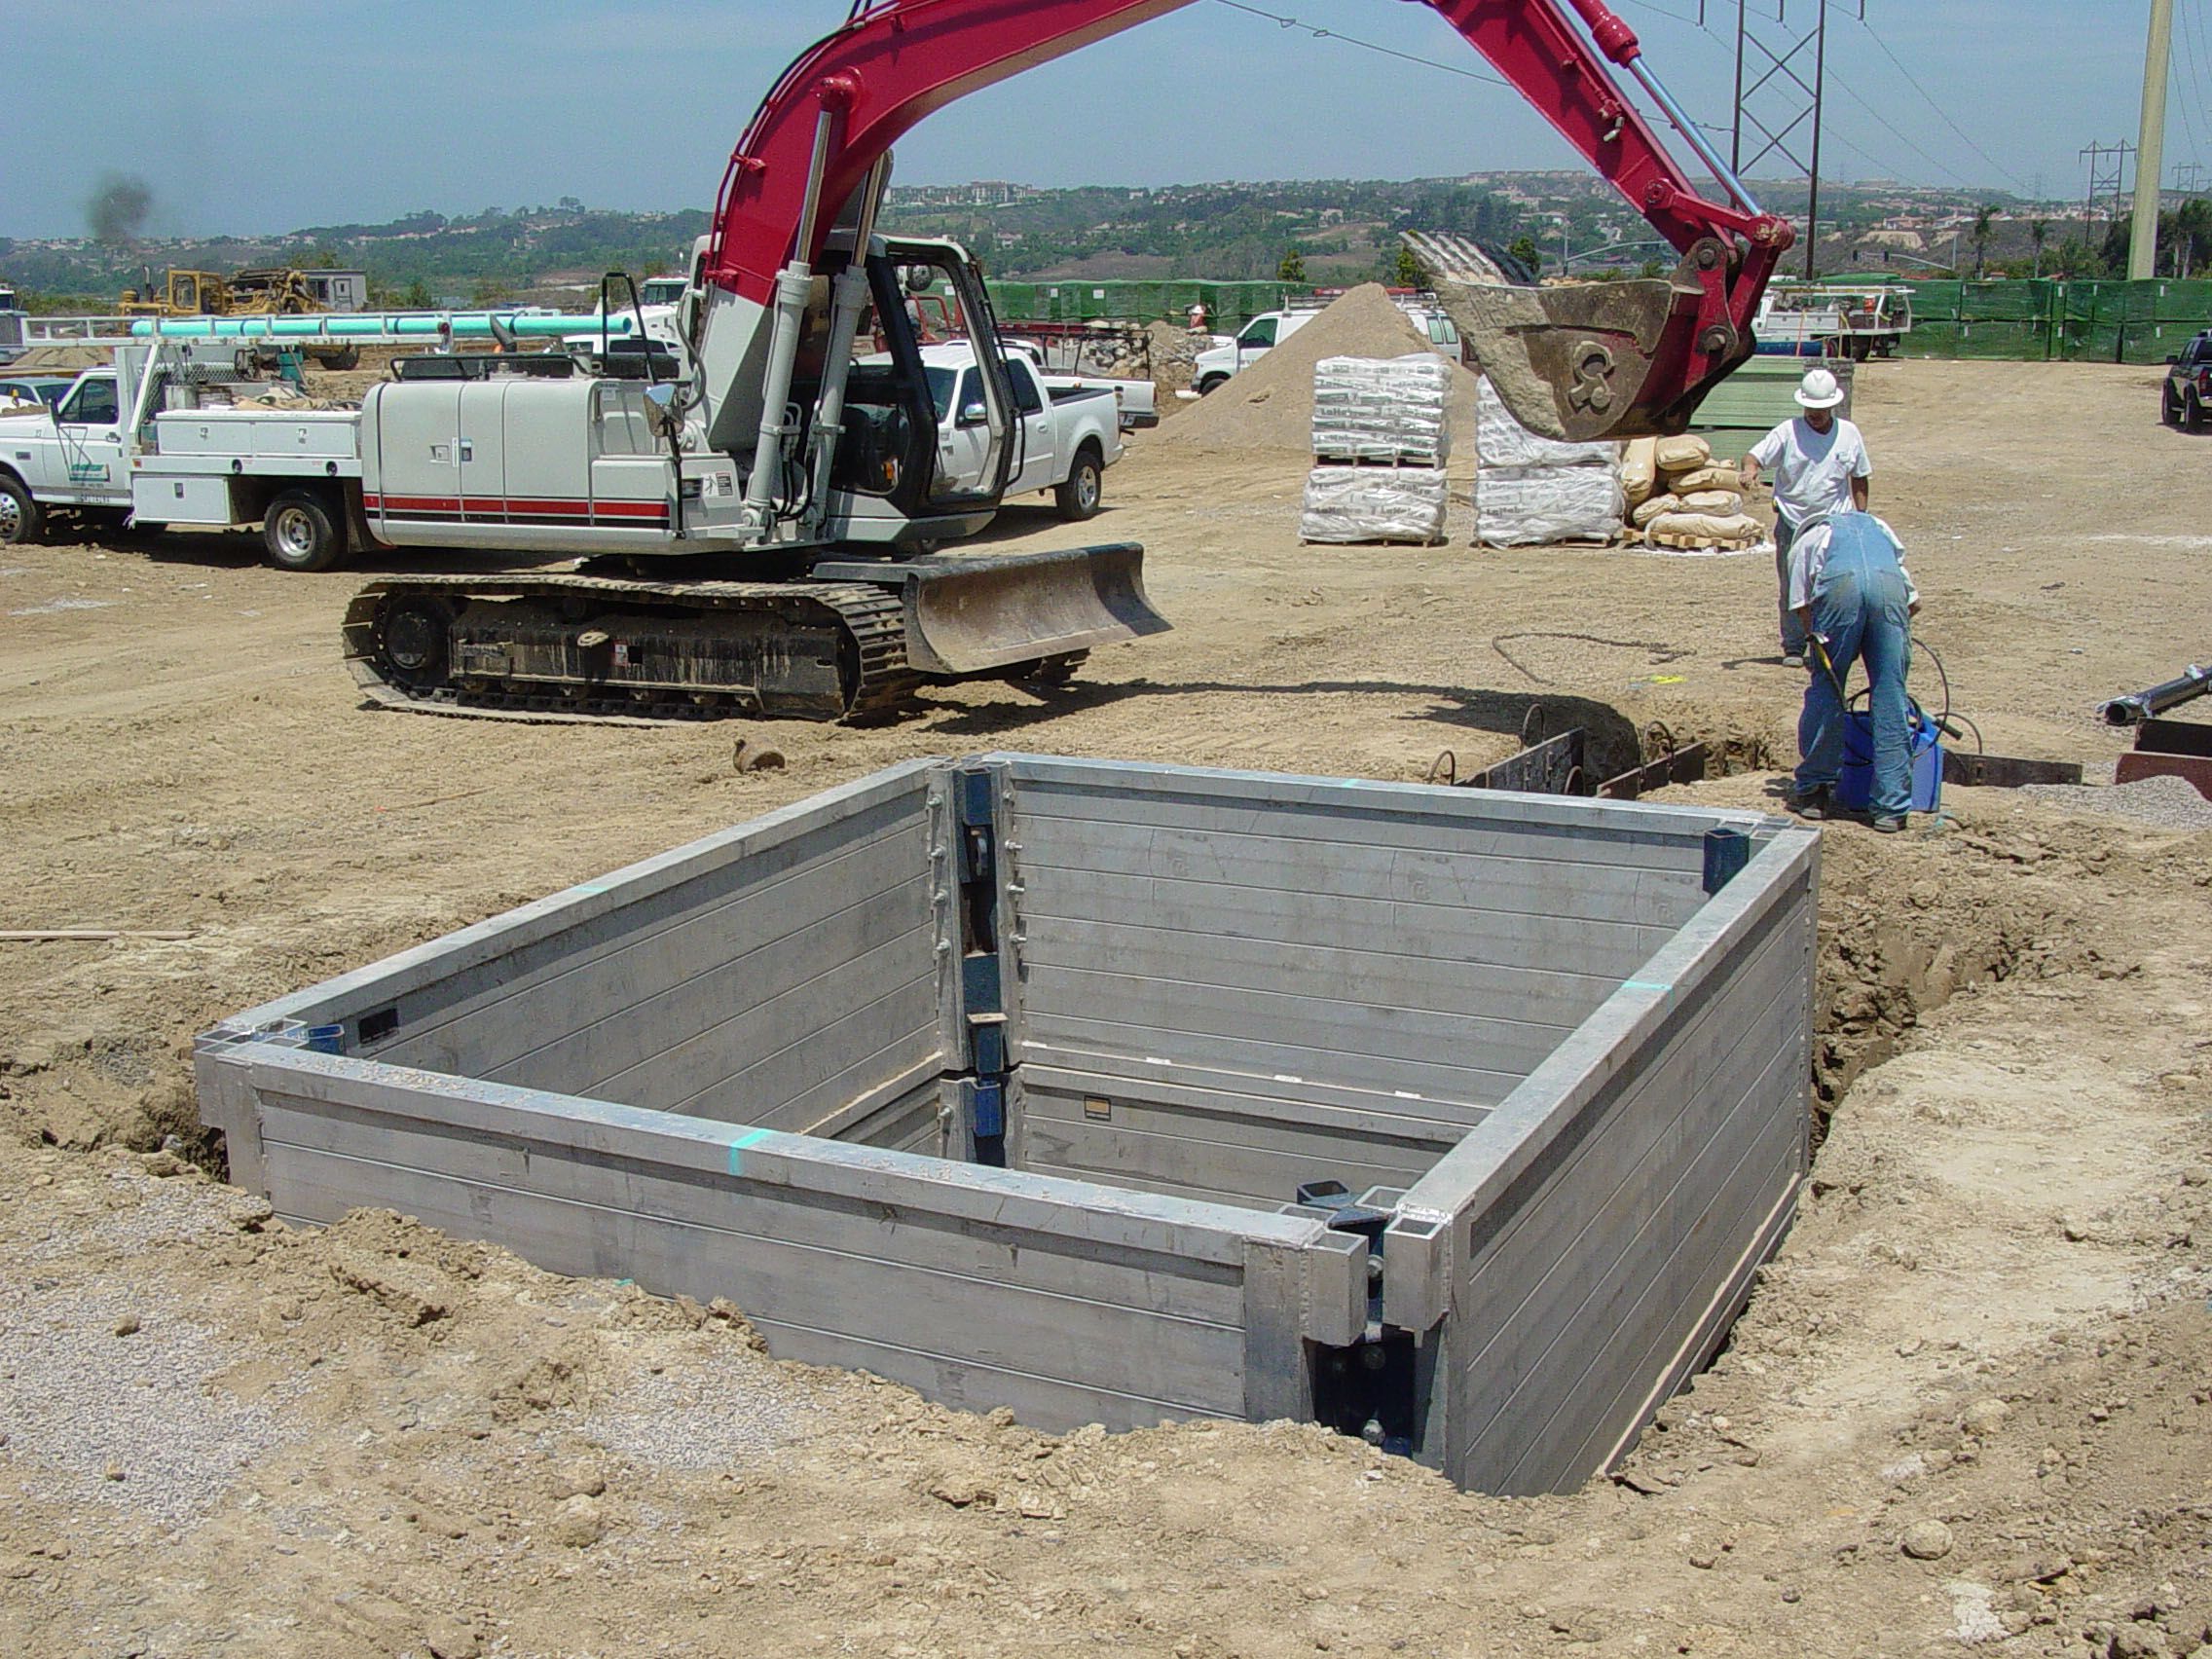 aluminum trench shield being used in the ground at trench shoring job site